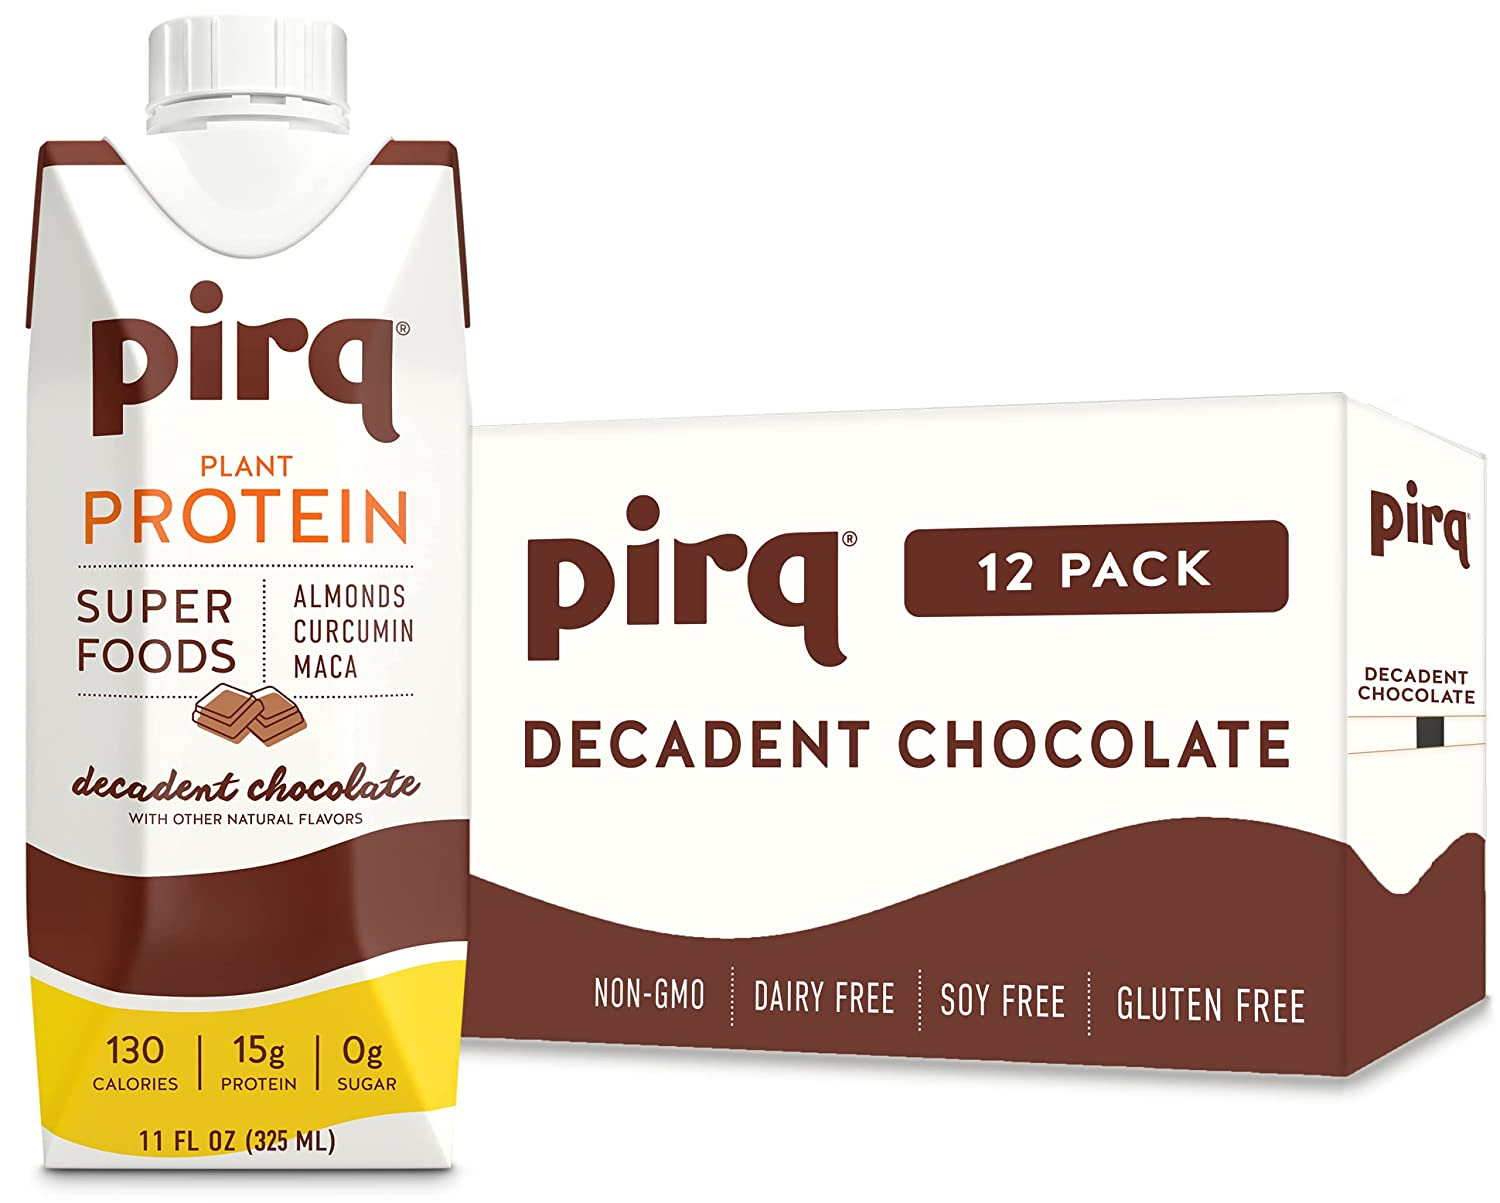 Pirq, Vegan Protein Shake, Turmeric Curcumin, Maca, Plant-Based Protein Drink, Gluten-Free, Dairy-Free, Soy-Free, Non-Gmo, Vegetarian, Kosher, Keto, Low Carb, Low Calorie (Decadent Chocolate, 12 Pack)